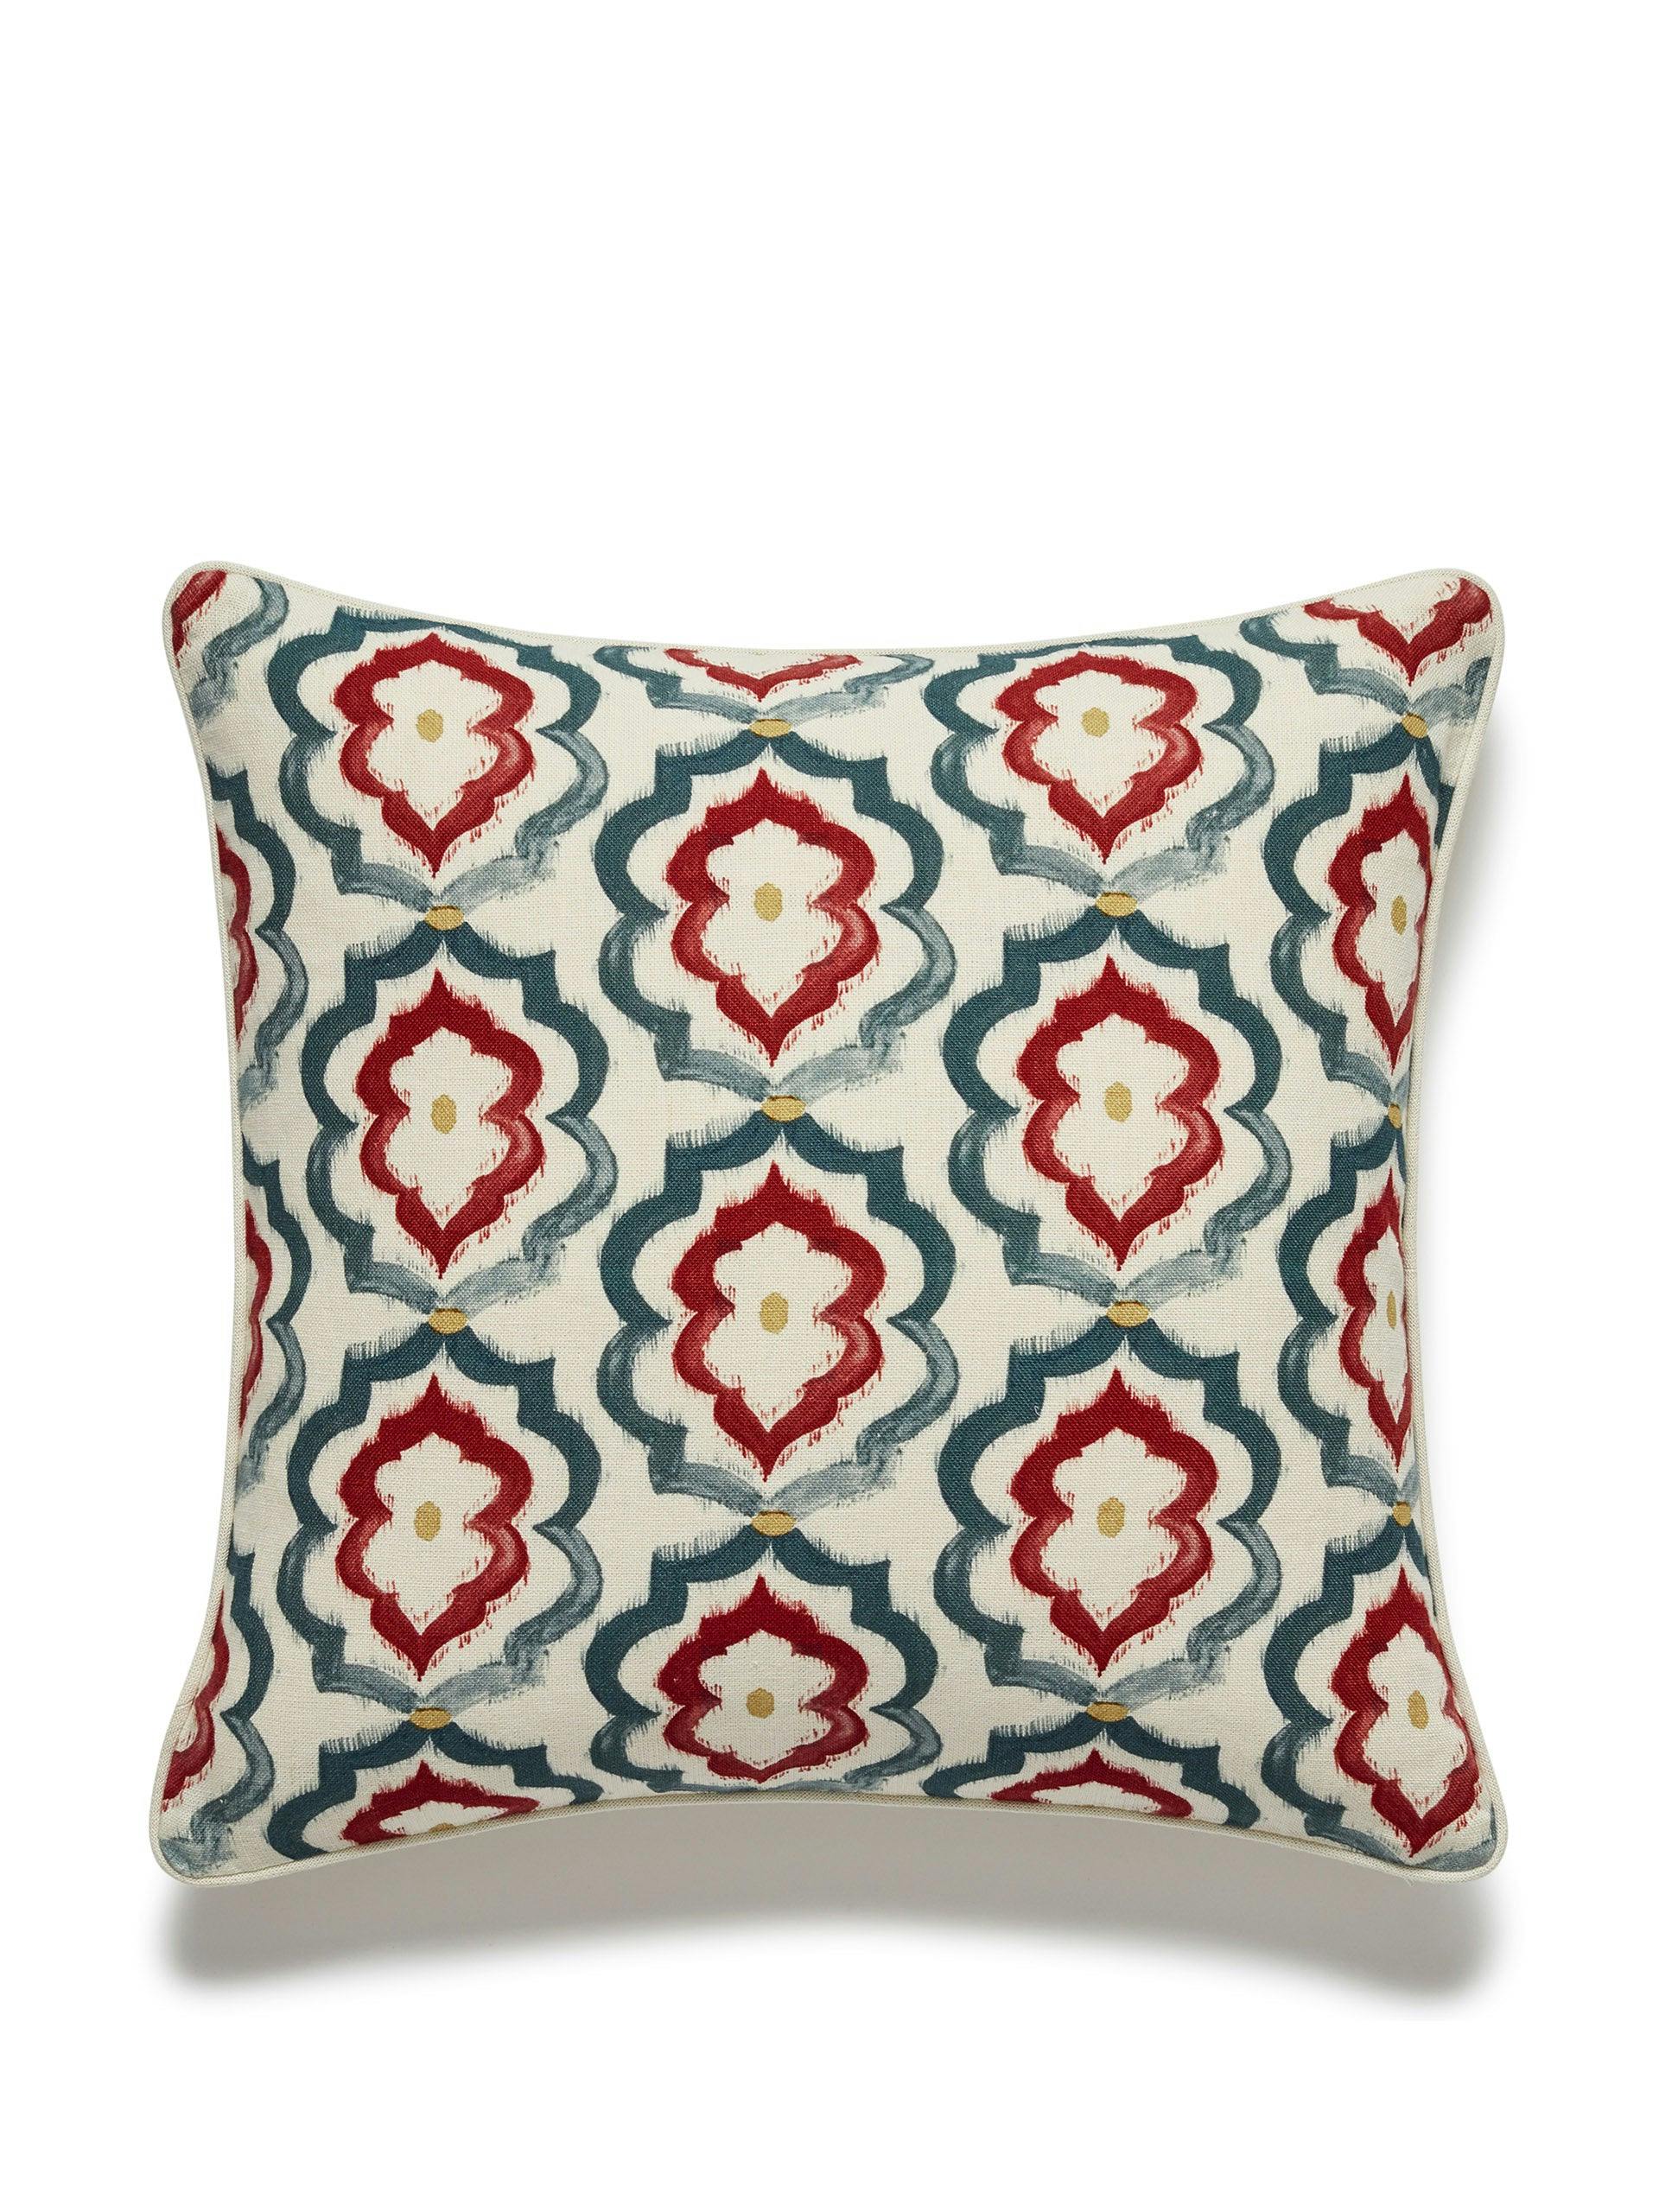 Borrayo Dot cushion cover in dark blue and red